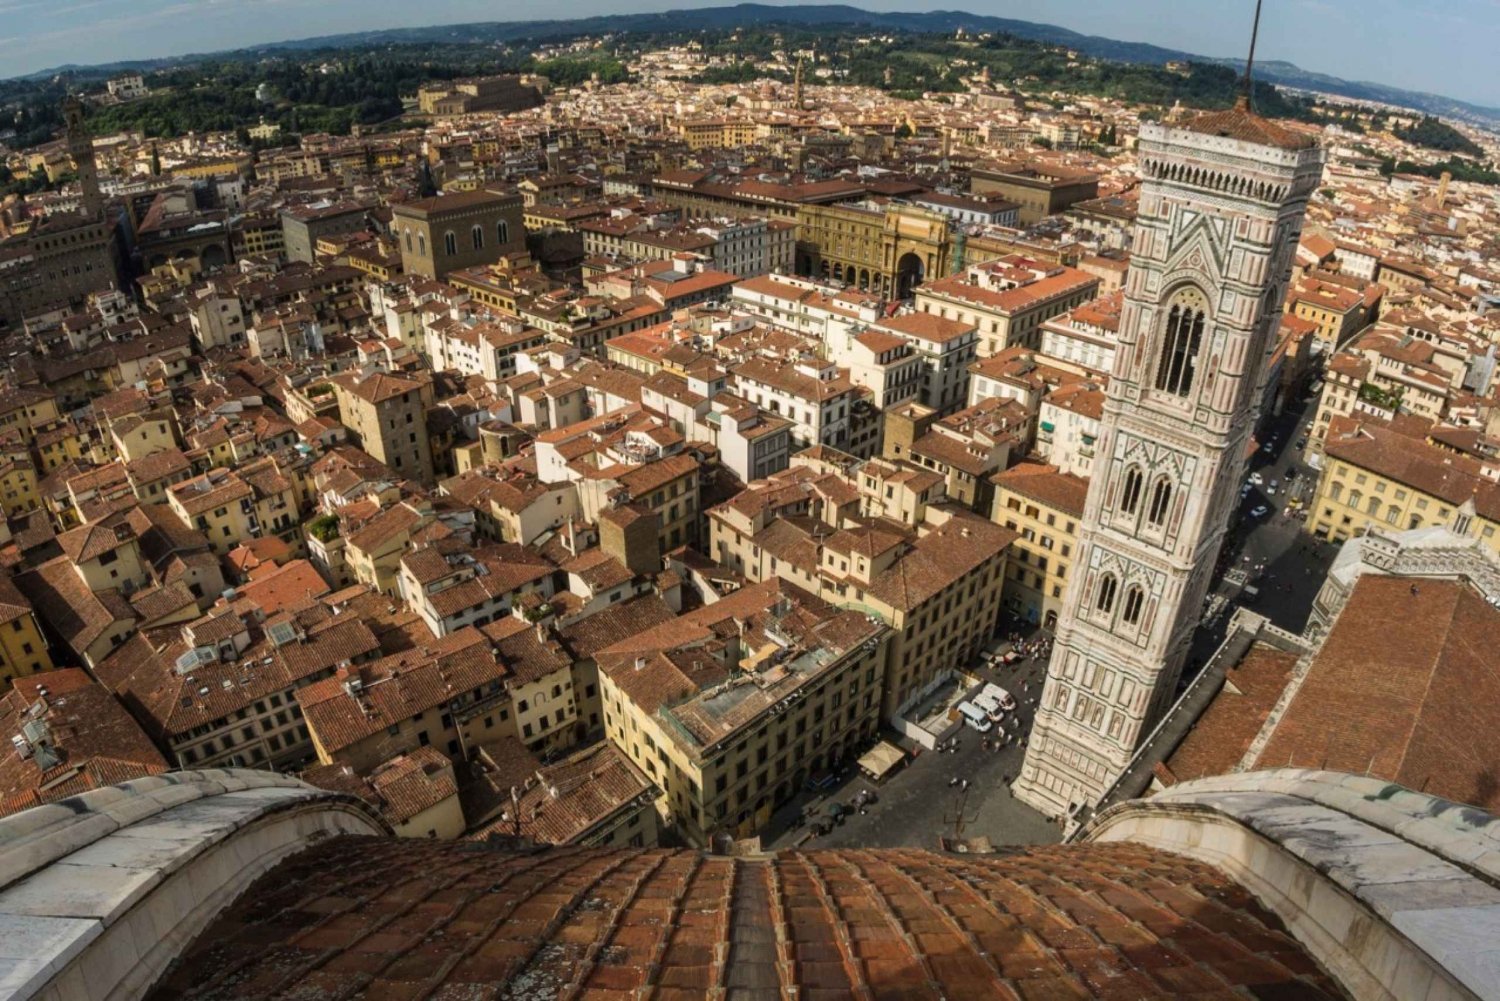 Florence: Brunelleschi's Dome Audio Guided Tour with Host